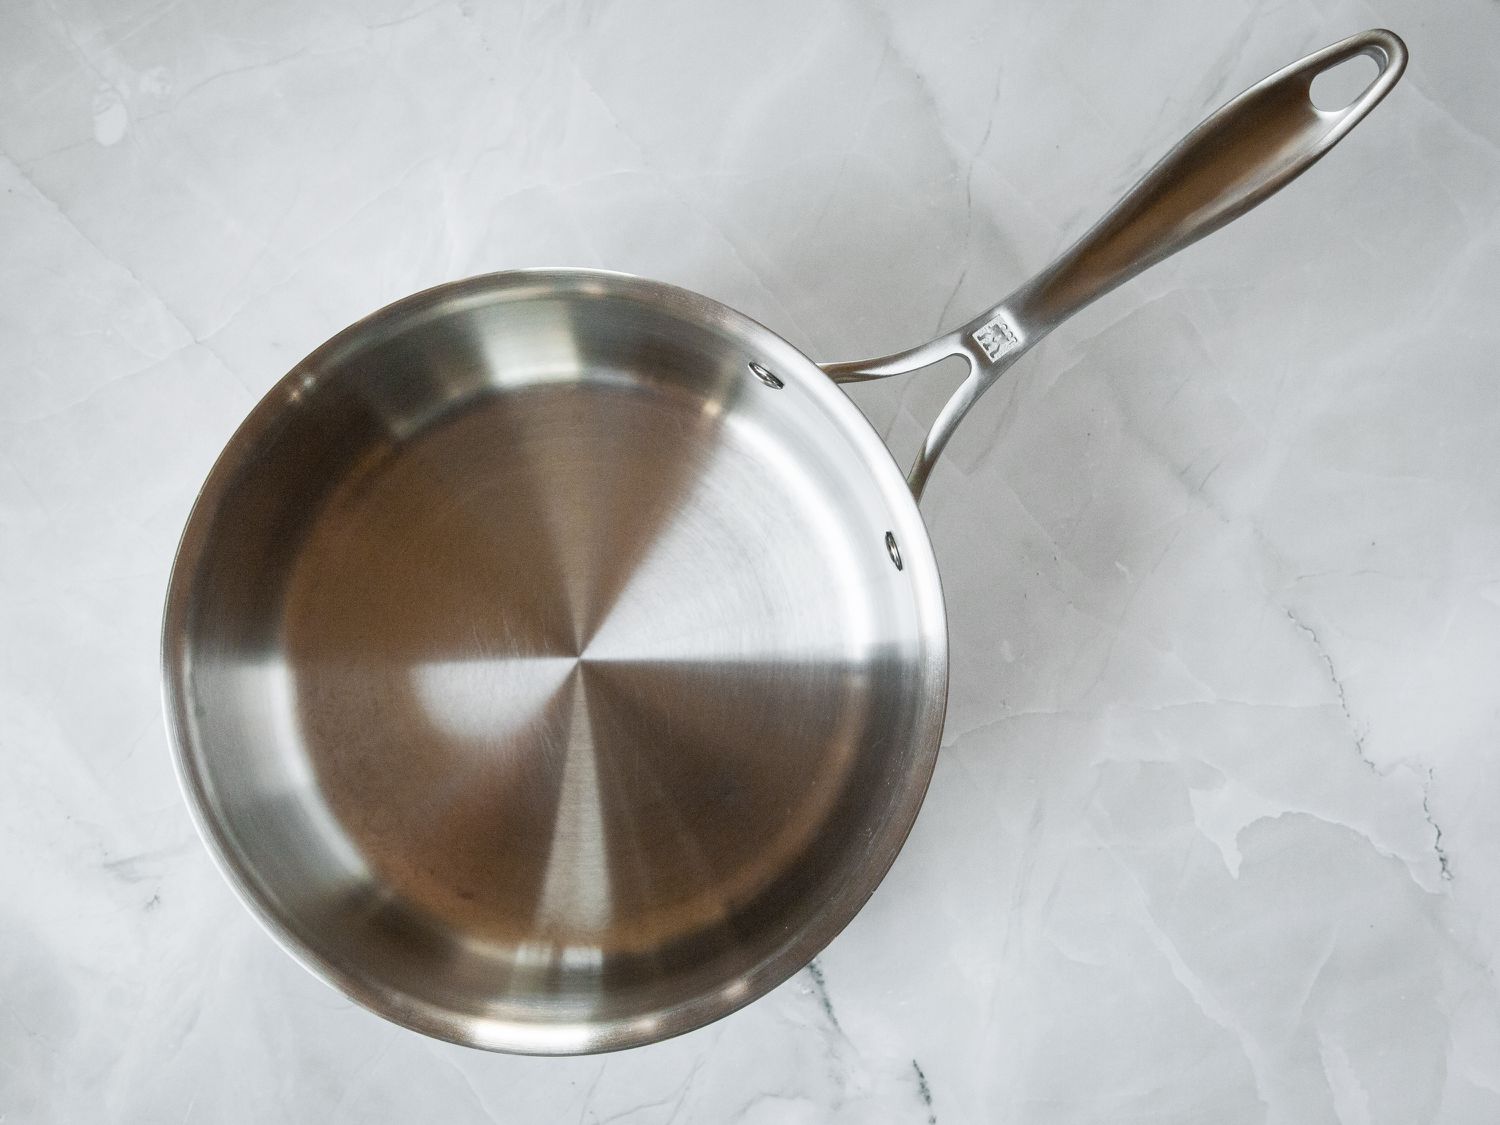 A stainless steel saucepan on a marble countertop